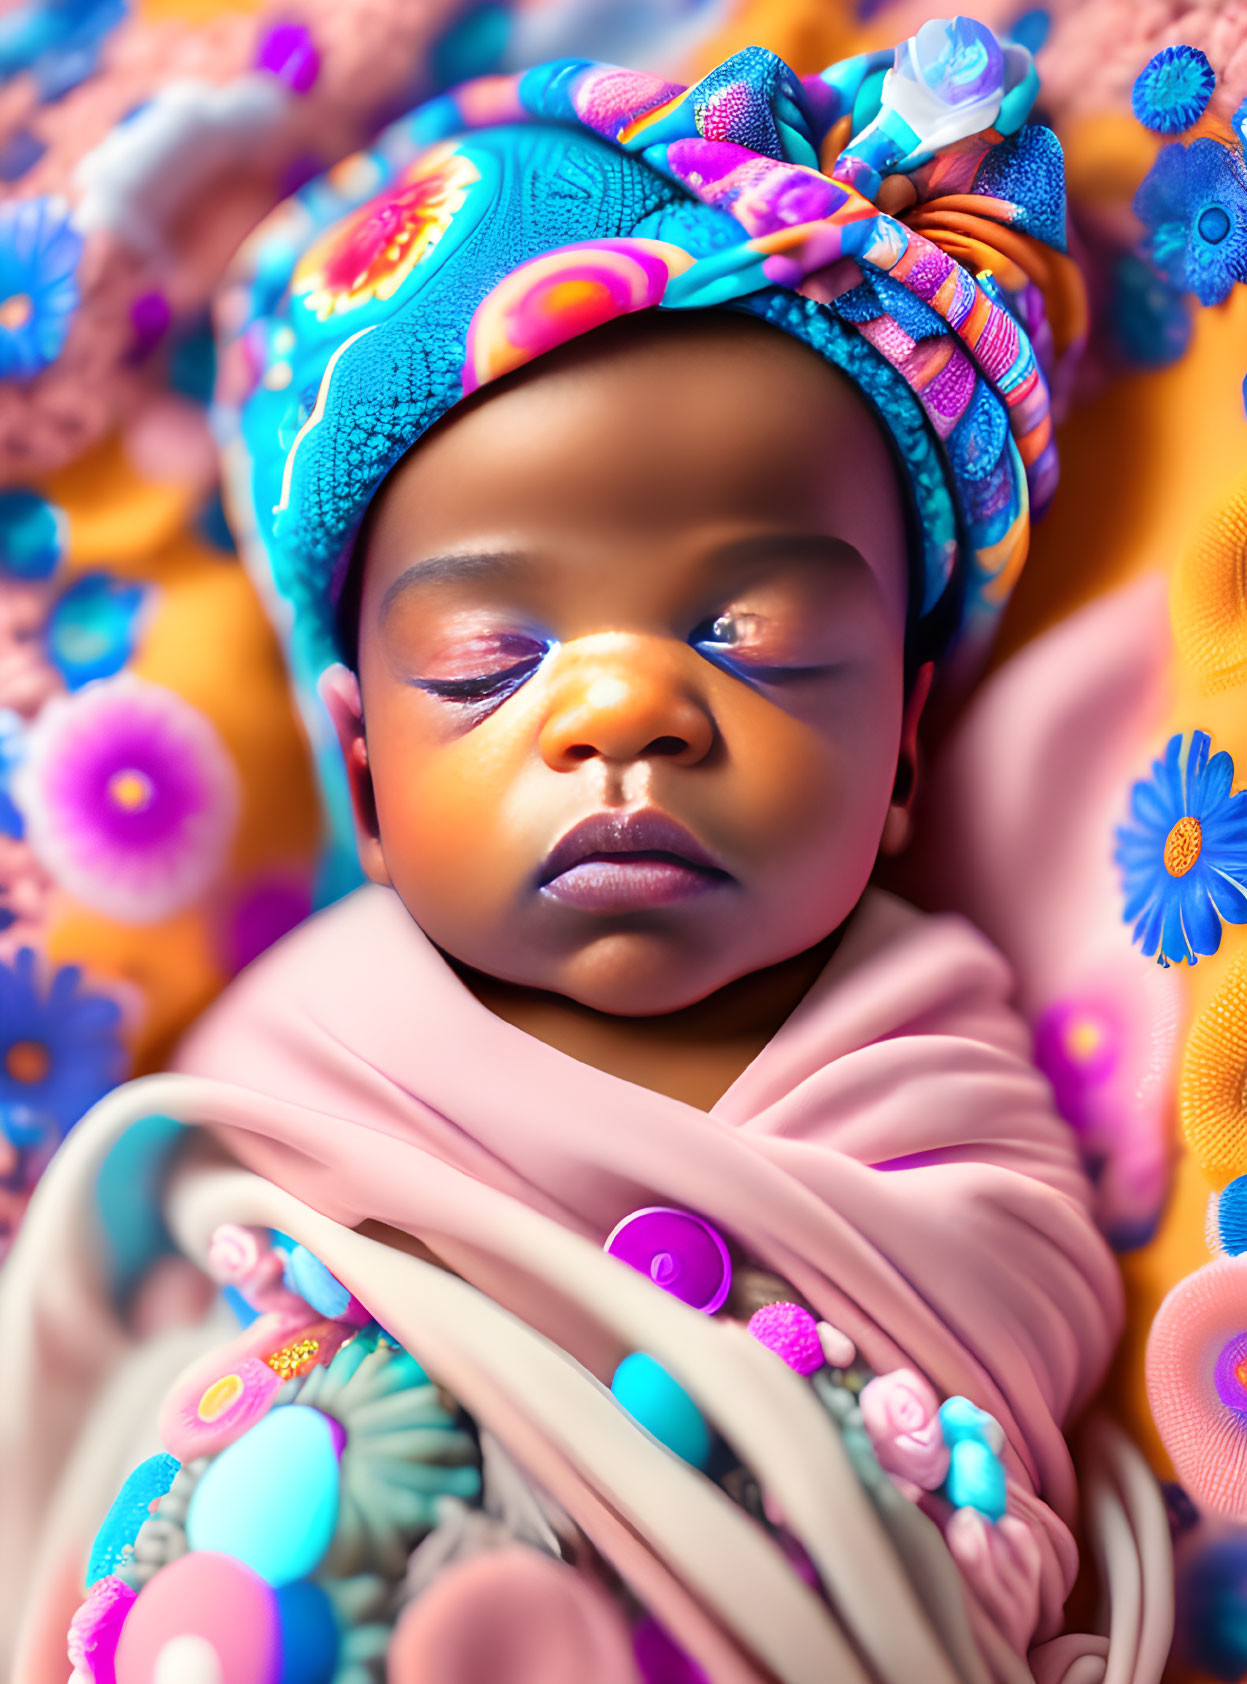 Adorable baby with vibrant headwrap on pink swaddle and floral backdrop